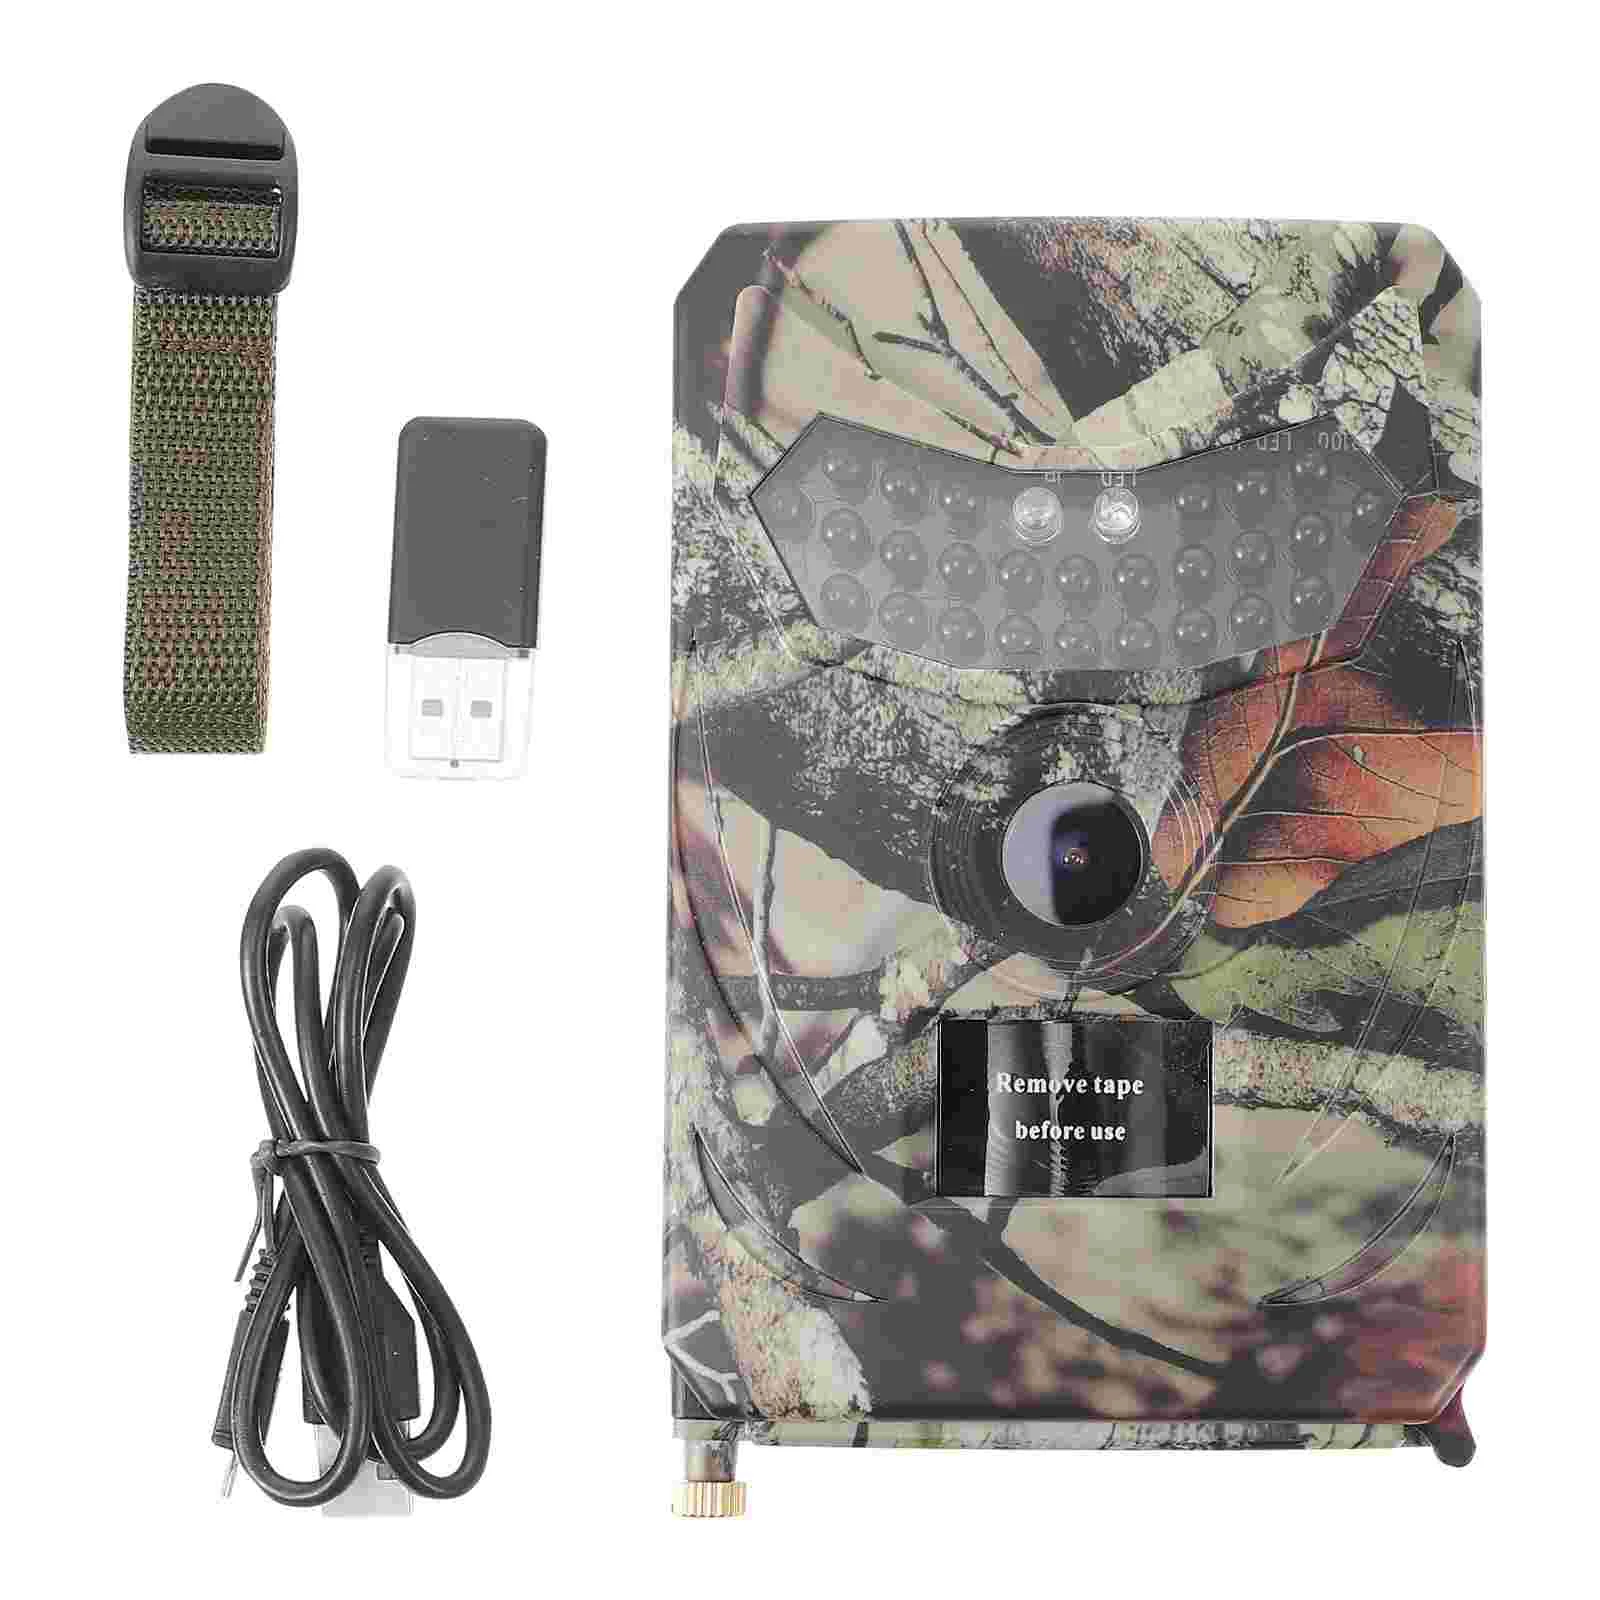 

1080 P Camera Outdoor Scouting Hunting Night Vision Water Proof Trail Waterproof Sight